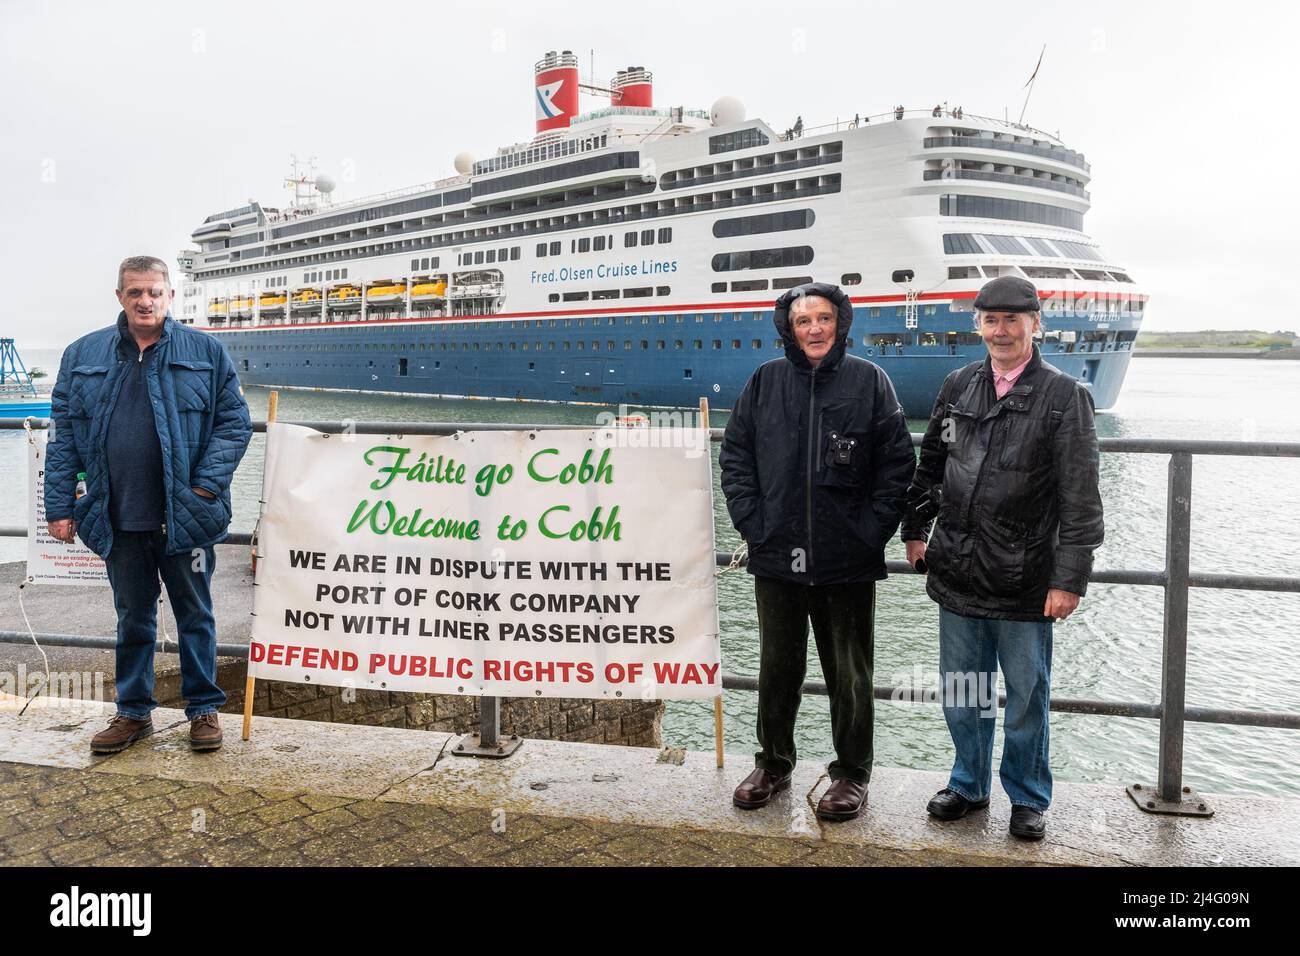 Cobh, Co. Cork, Ireland. 15th Apr, 2022. The first cruise ship to visit the Port of Cork in 3 years, 'Borealis' arrives at Cobh Cruise Terminal this morning. The 'Save Cobh Right of Way' protest group consisting of Roy Collins; Dermot Cahill and Liam O'Sullivan, held a small protest against the Port of Cork's closure of the public right of way when cruise ships moor. Credit: AG News/Alamy Live News Stock Photo